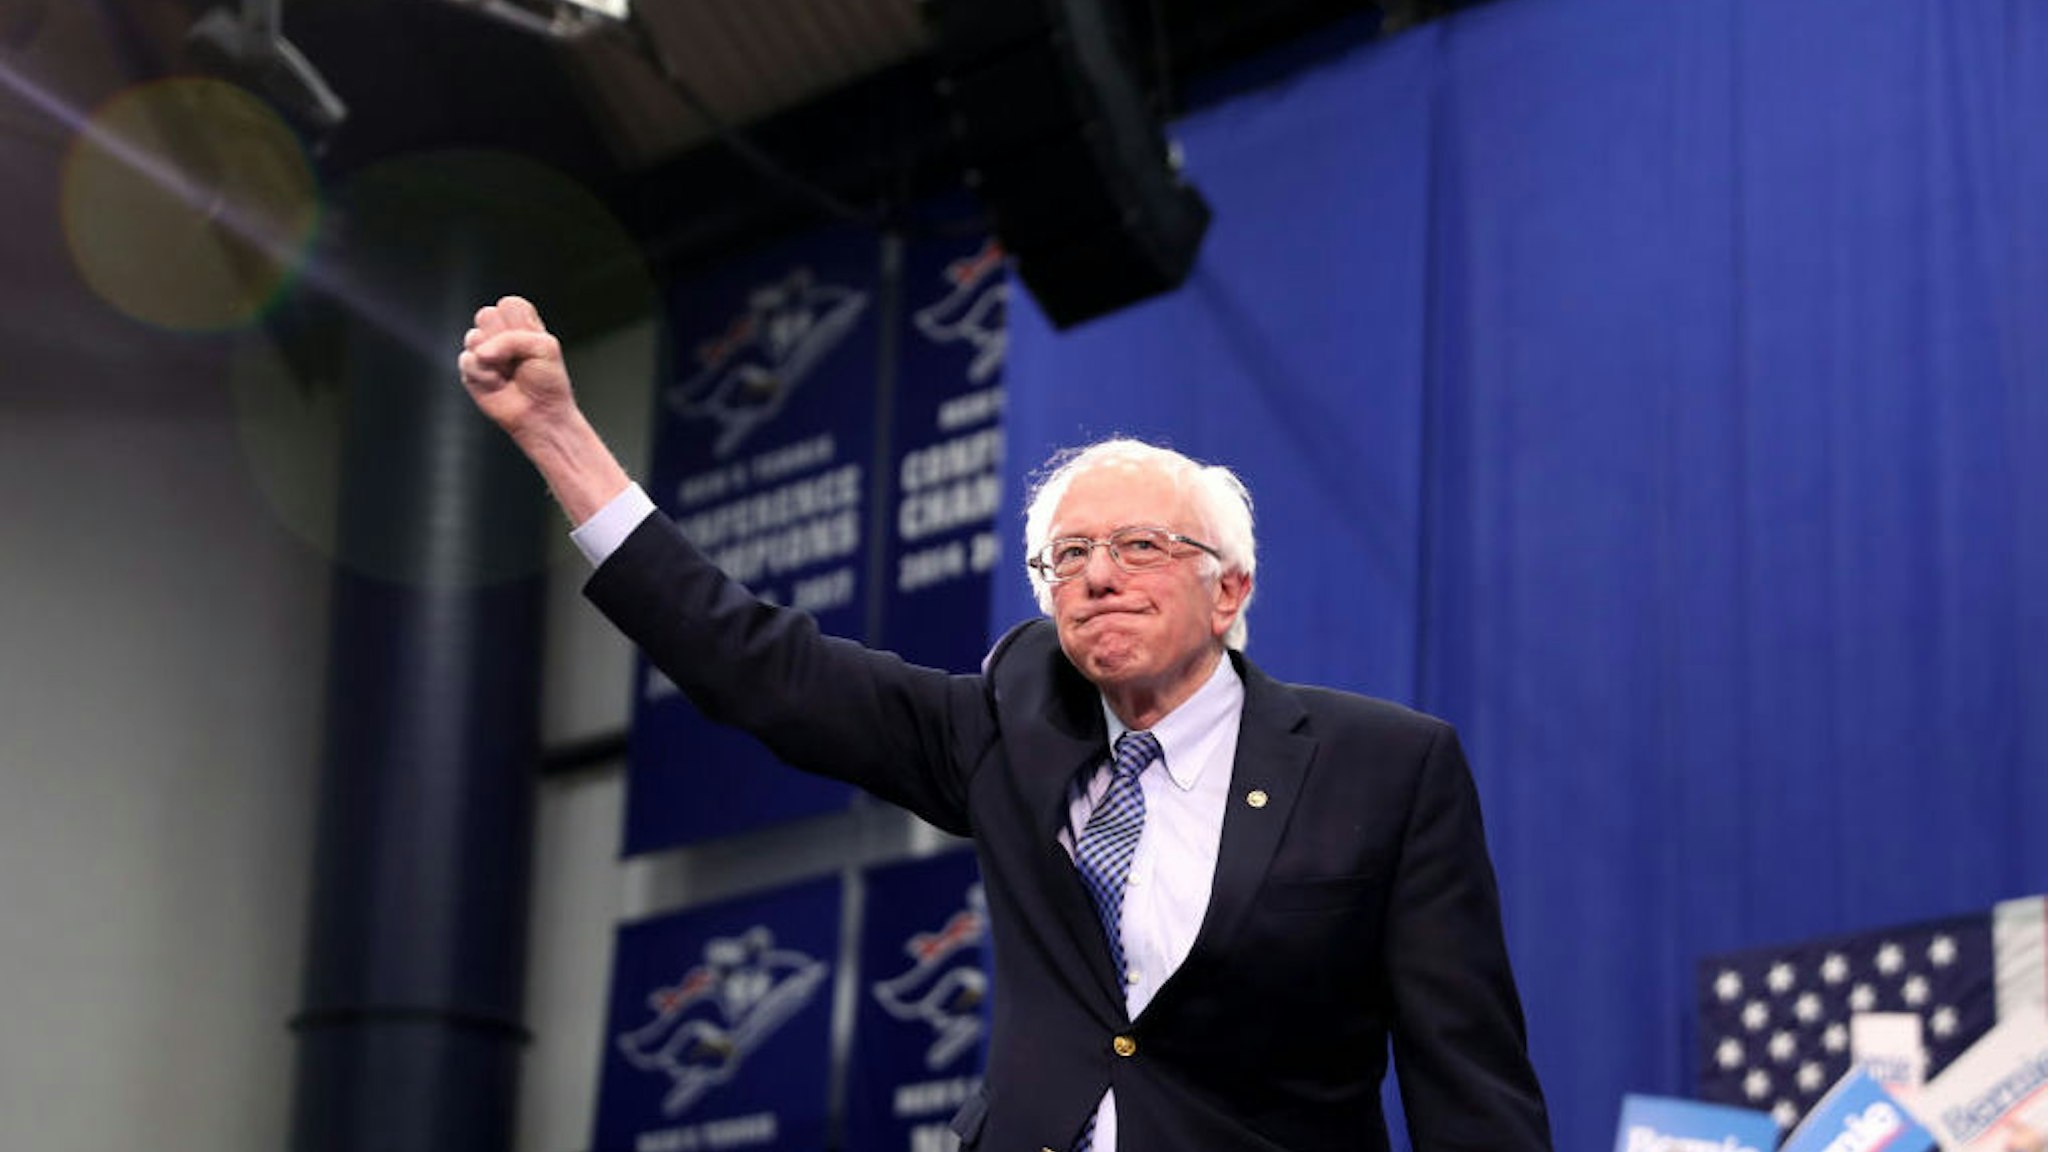 MANCHESTER, NEW HAMPSHIRE - FEBRUARY 11: Democratic presidential candidate Sen. Bernie Sanders (I-VT) takes the stage during a primary night event on February 11, 2020 in Manchester, New Hampshire. New Hampshire voters cast their ballots today in the first-in-the-nation presidential primary.